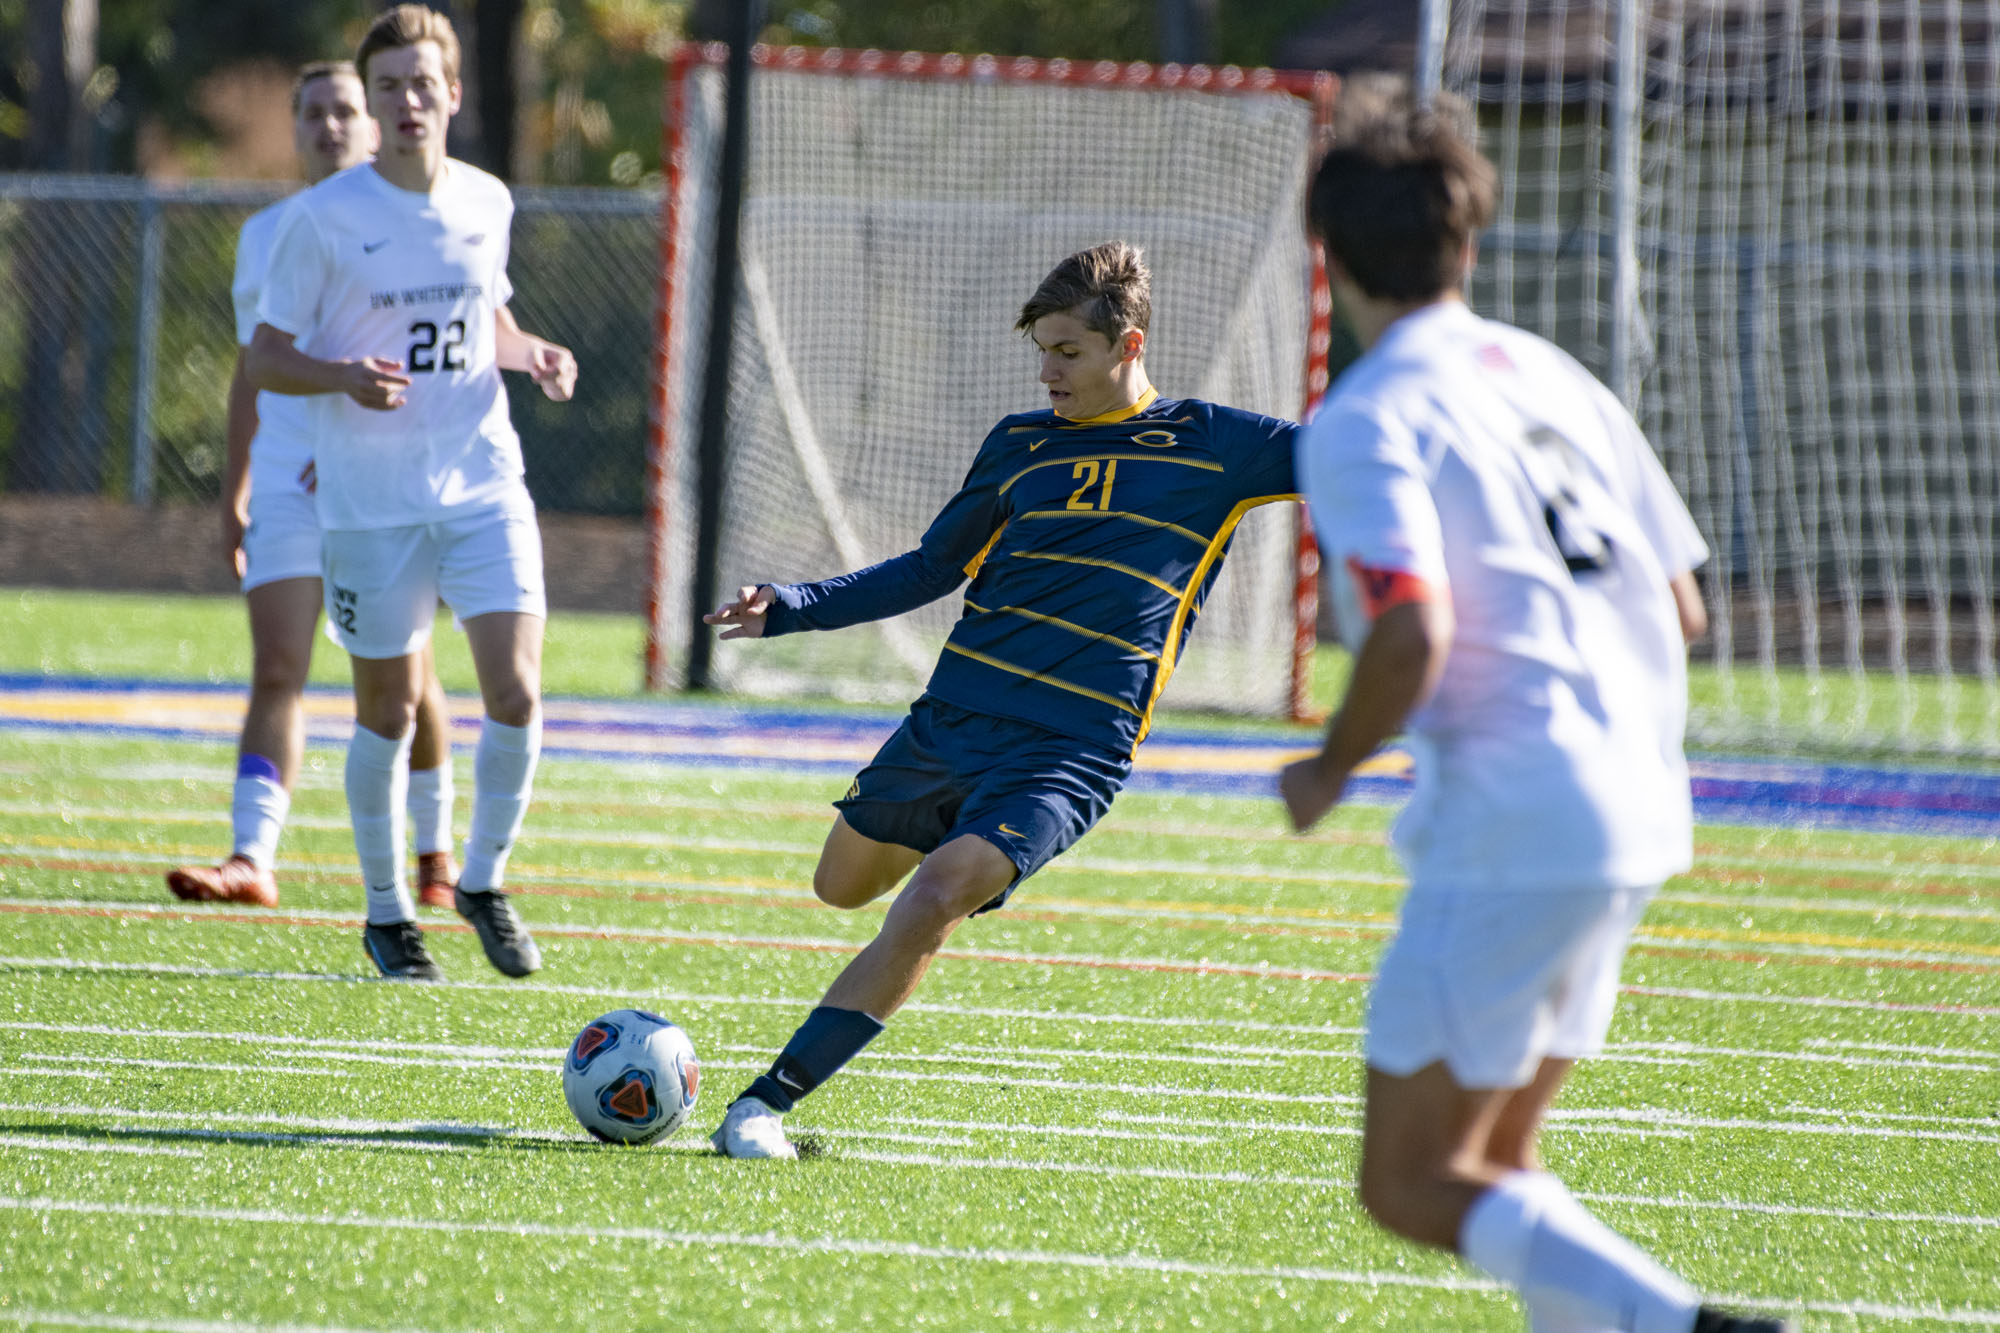 Blugolds Erupt With 11 Goals to Remain Undefeated at Home